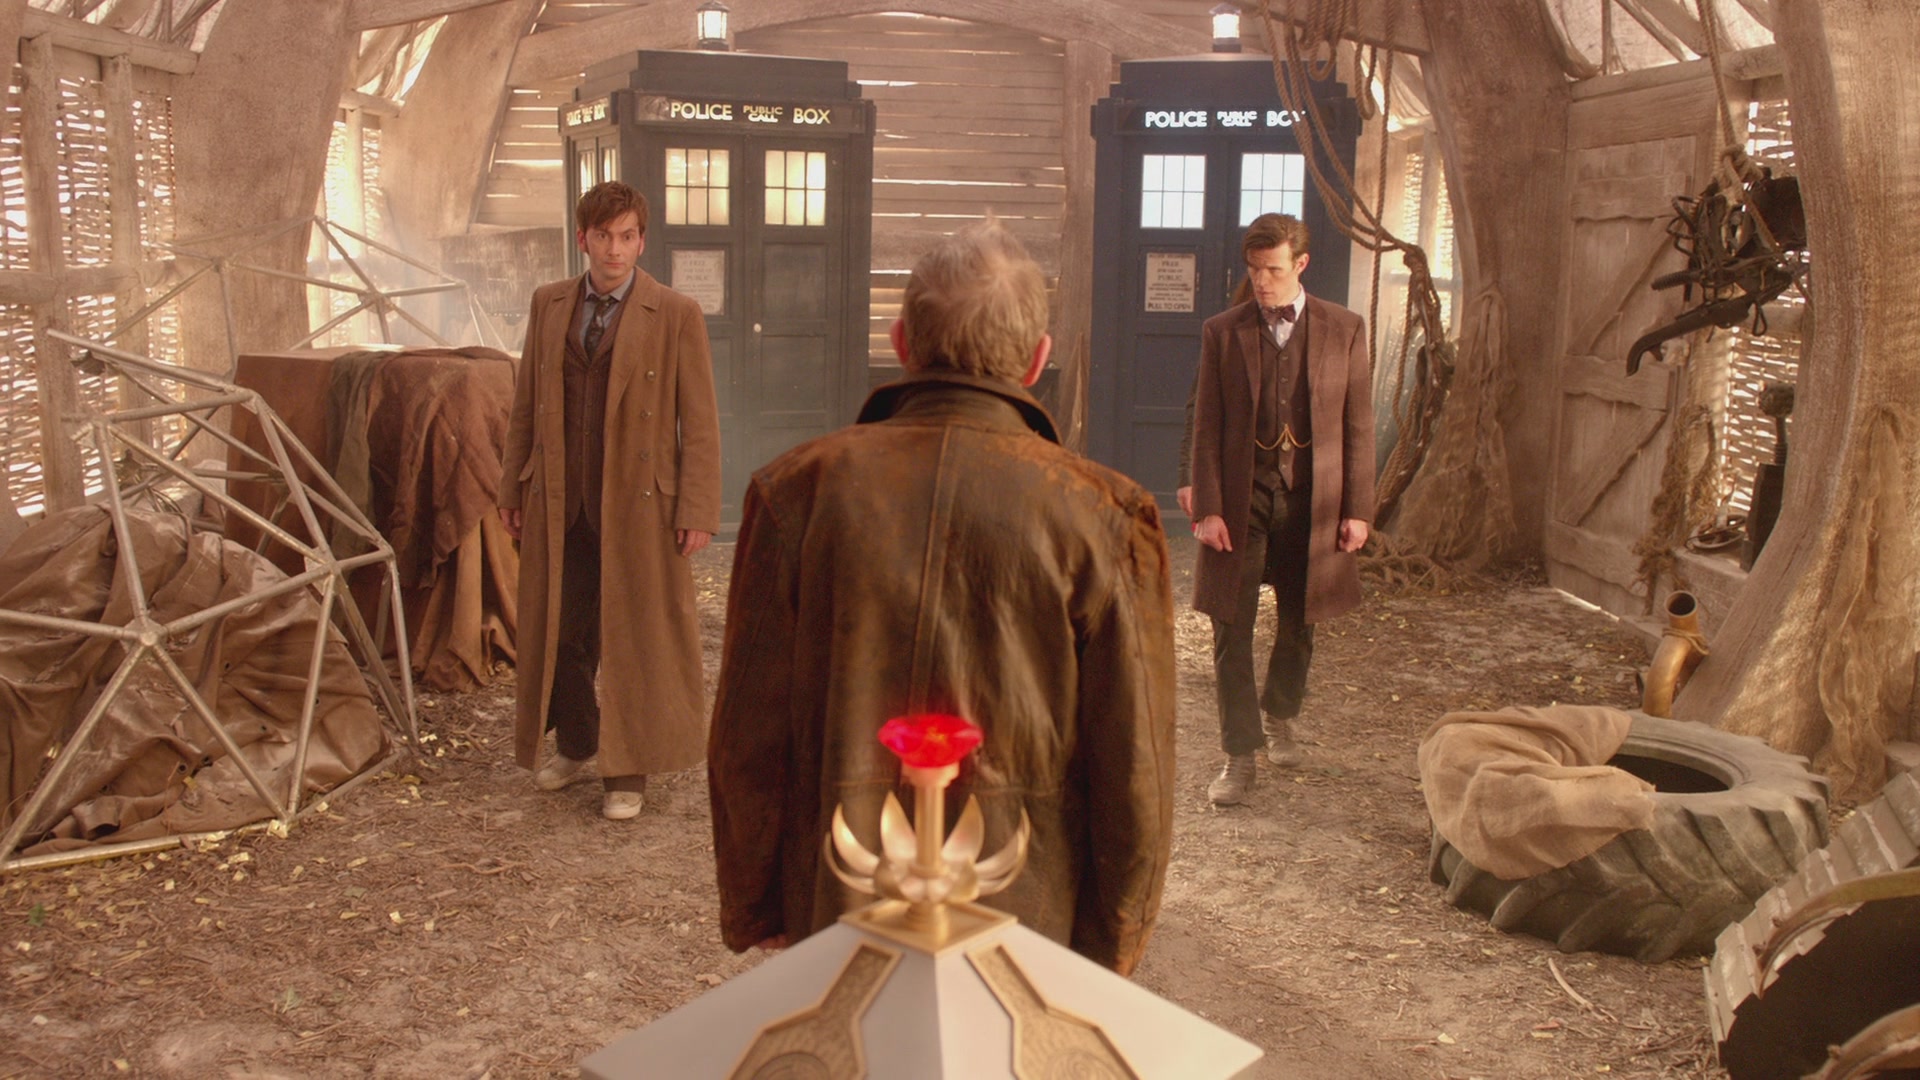 DayOfTheDoctor-Caps-1071.jpg